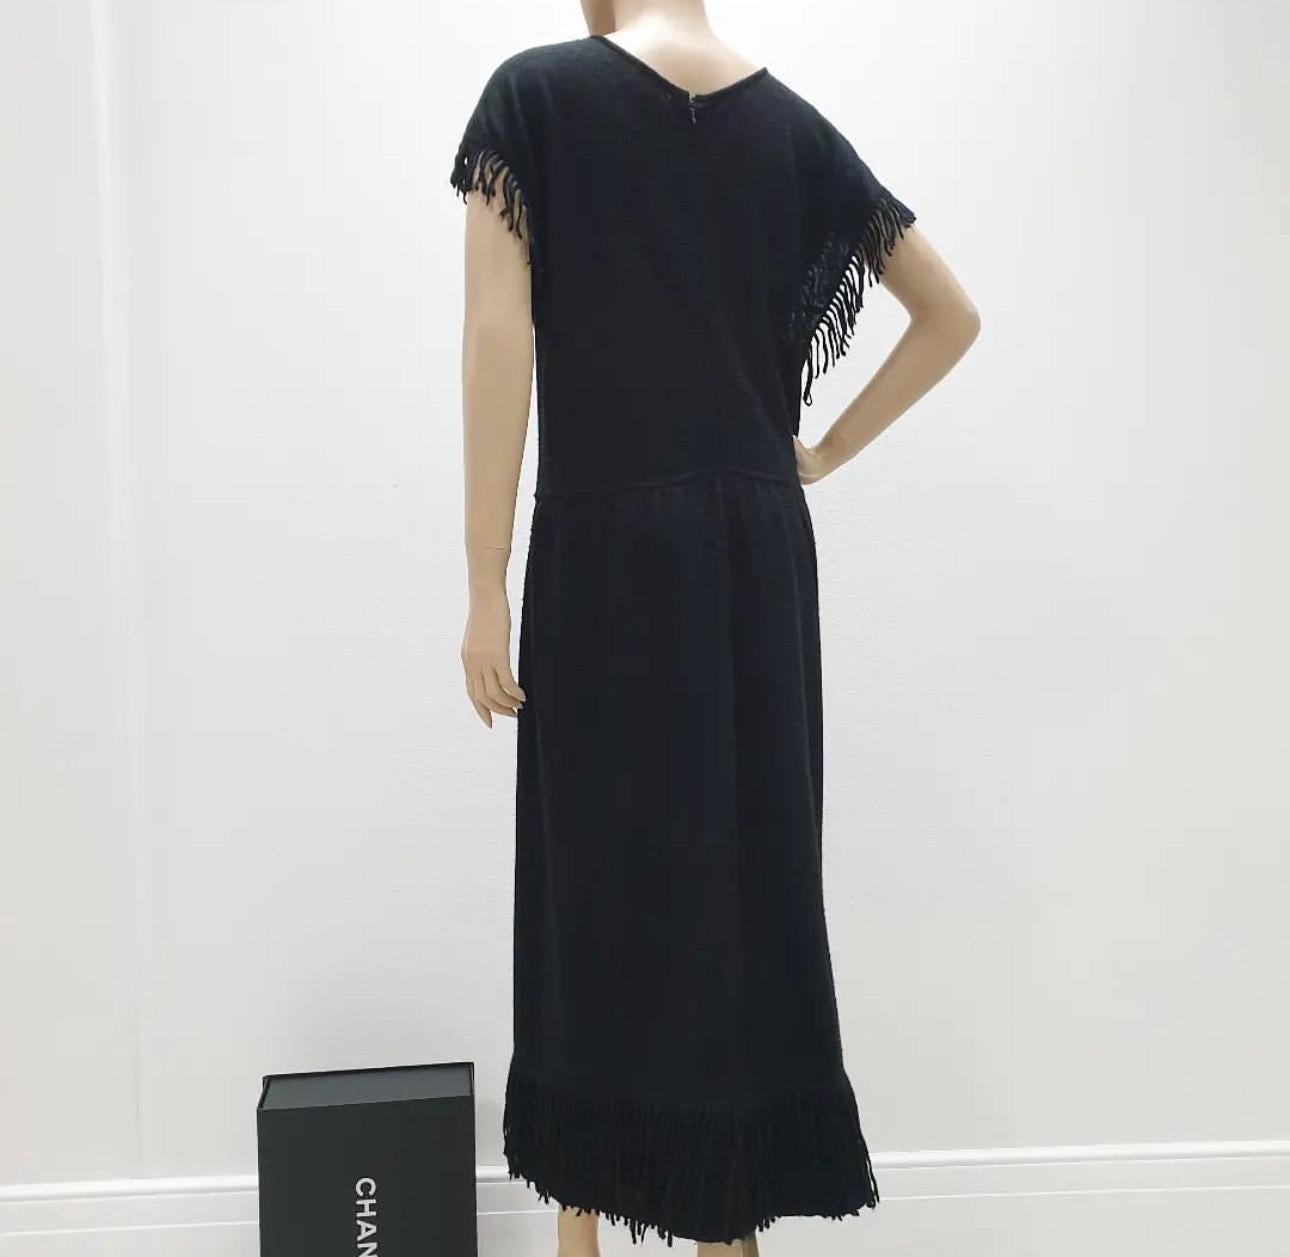 Black Chanel mohair and cashmere blend dress with crew neck, interlocking CC logo placard at waist, fringe trim throughout and concealed zip closure at back.

Beautiful Chanel Black knit dress with fringes on the short sleeves and the bottom of the